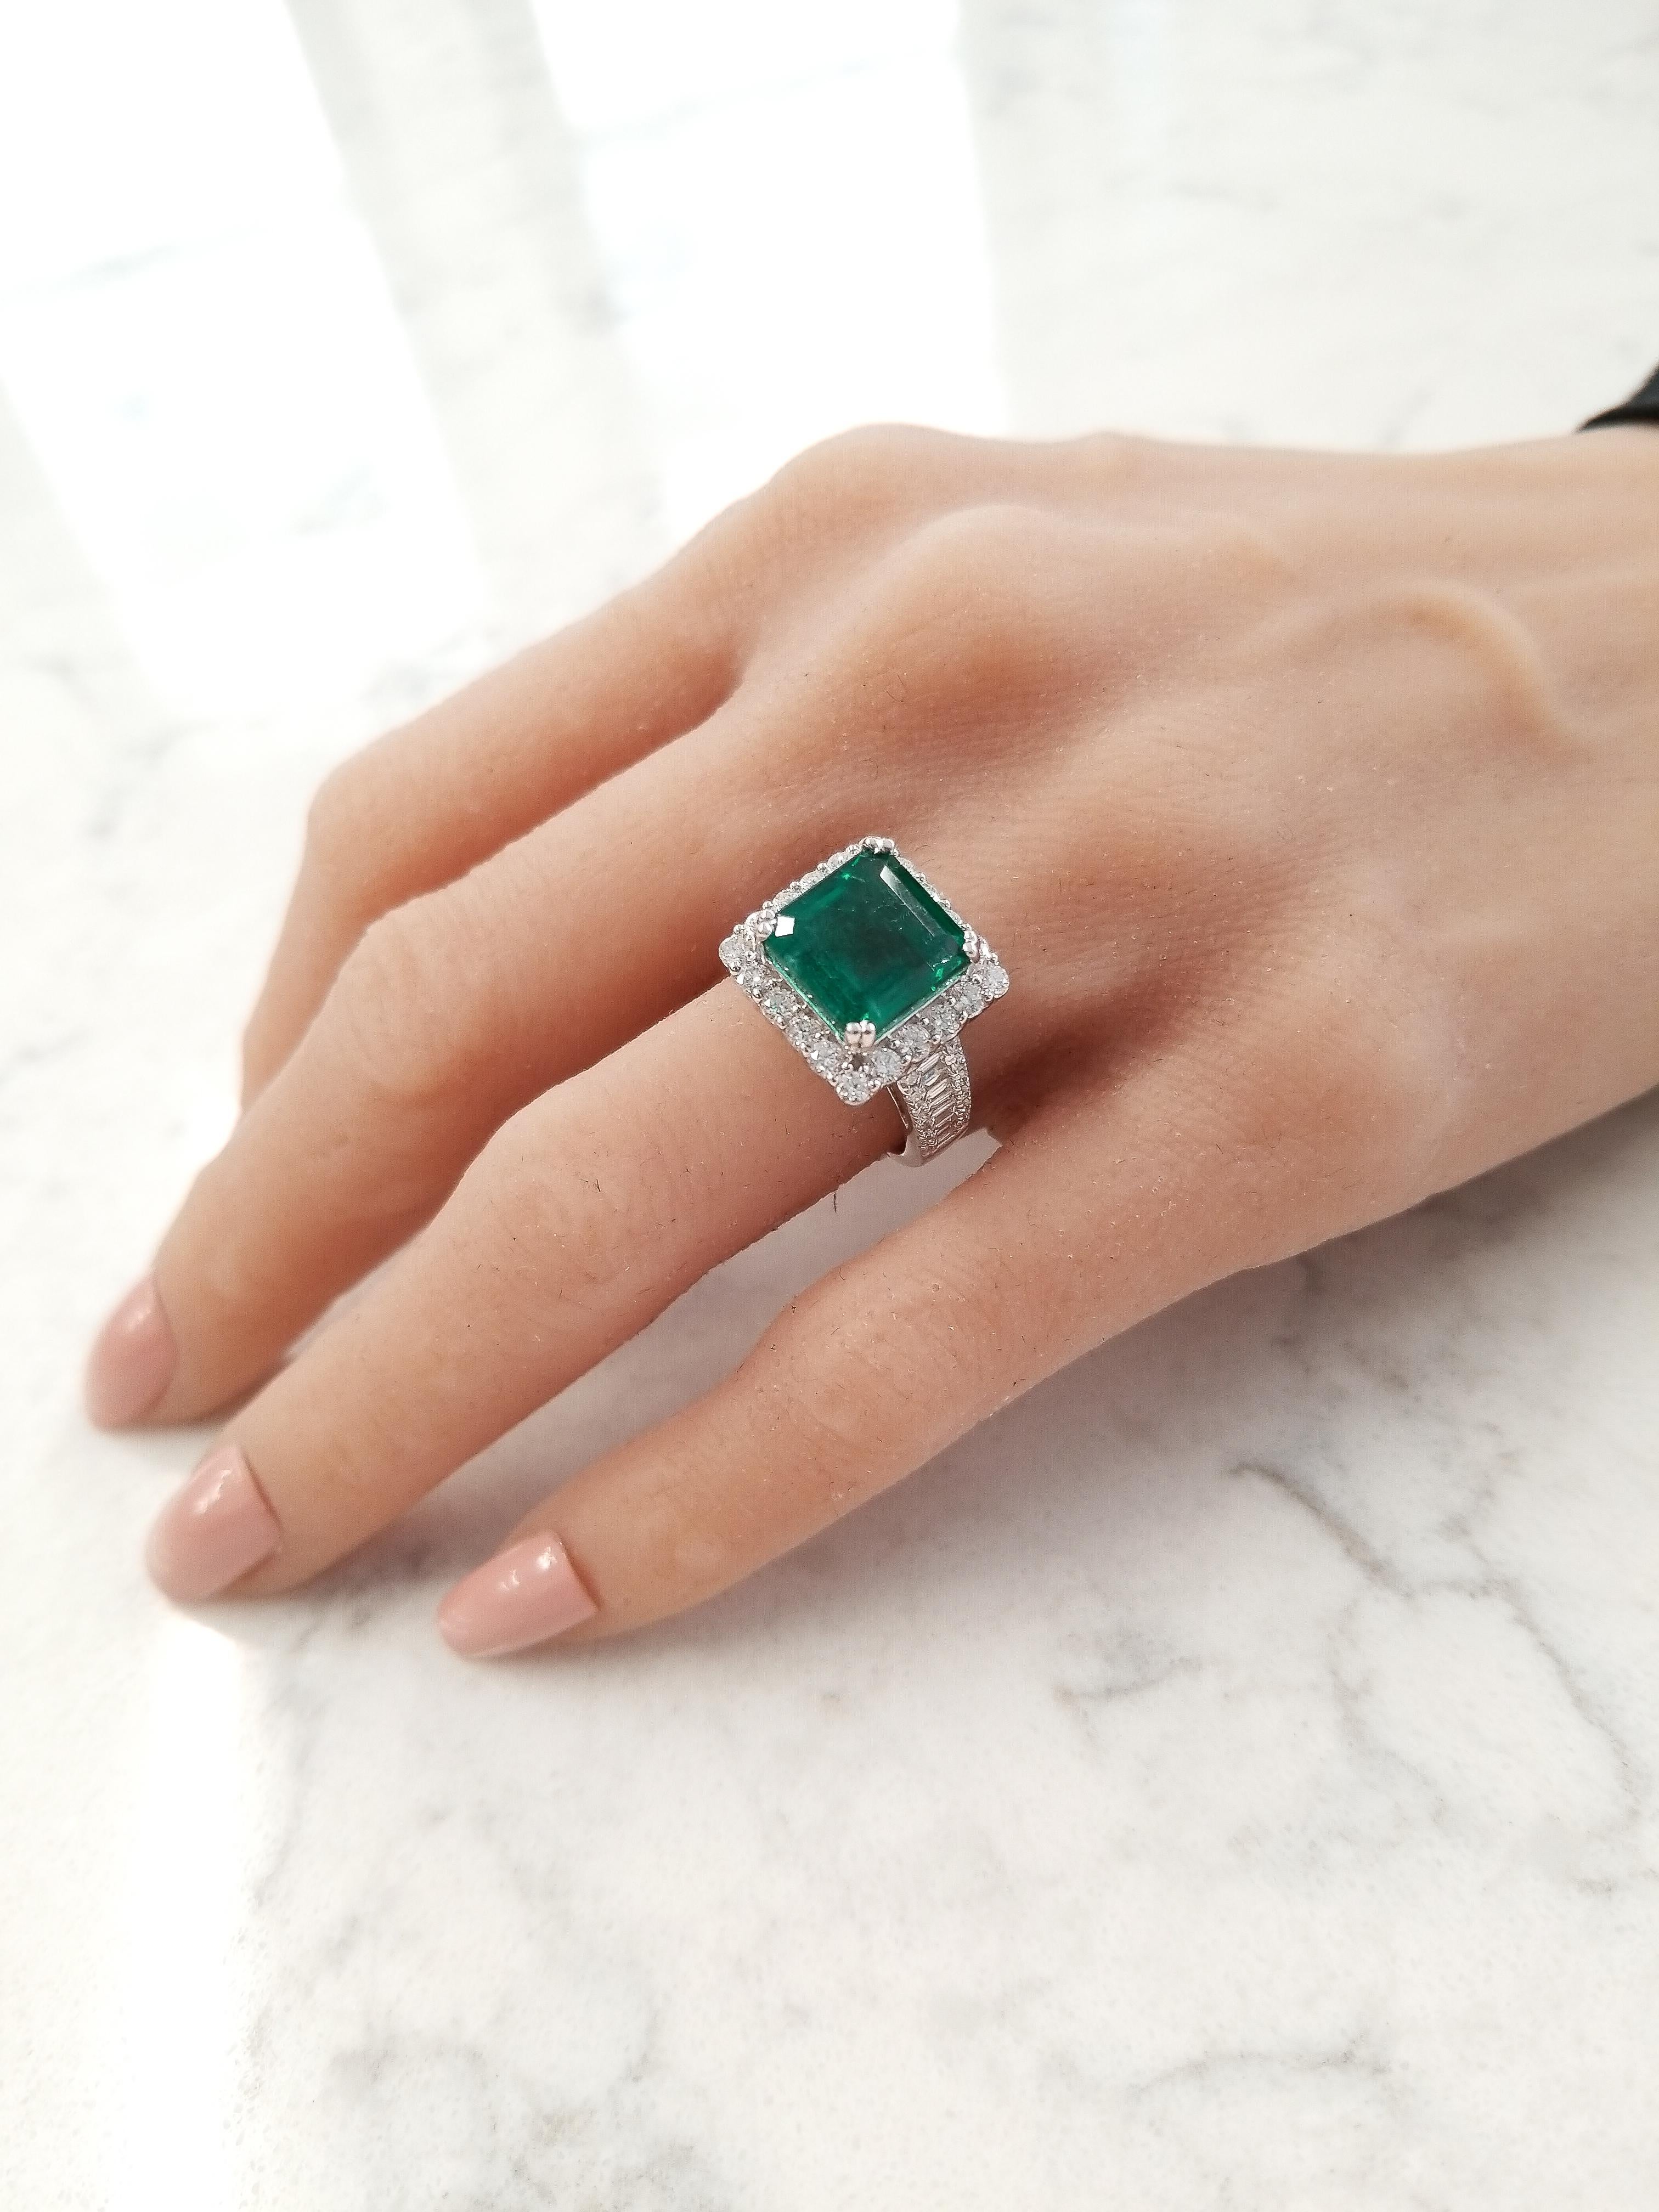 This cocktail ring features a 5.88 carat square emerald cut, vibrant grass-green emerald with measurements of 10.15 X 10.46mm. This emerald exhibits a lively, bright green shade. The gem source is Colombia. Its color, luster, clarity, and